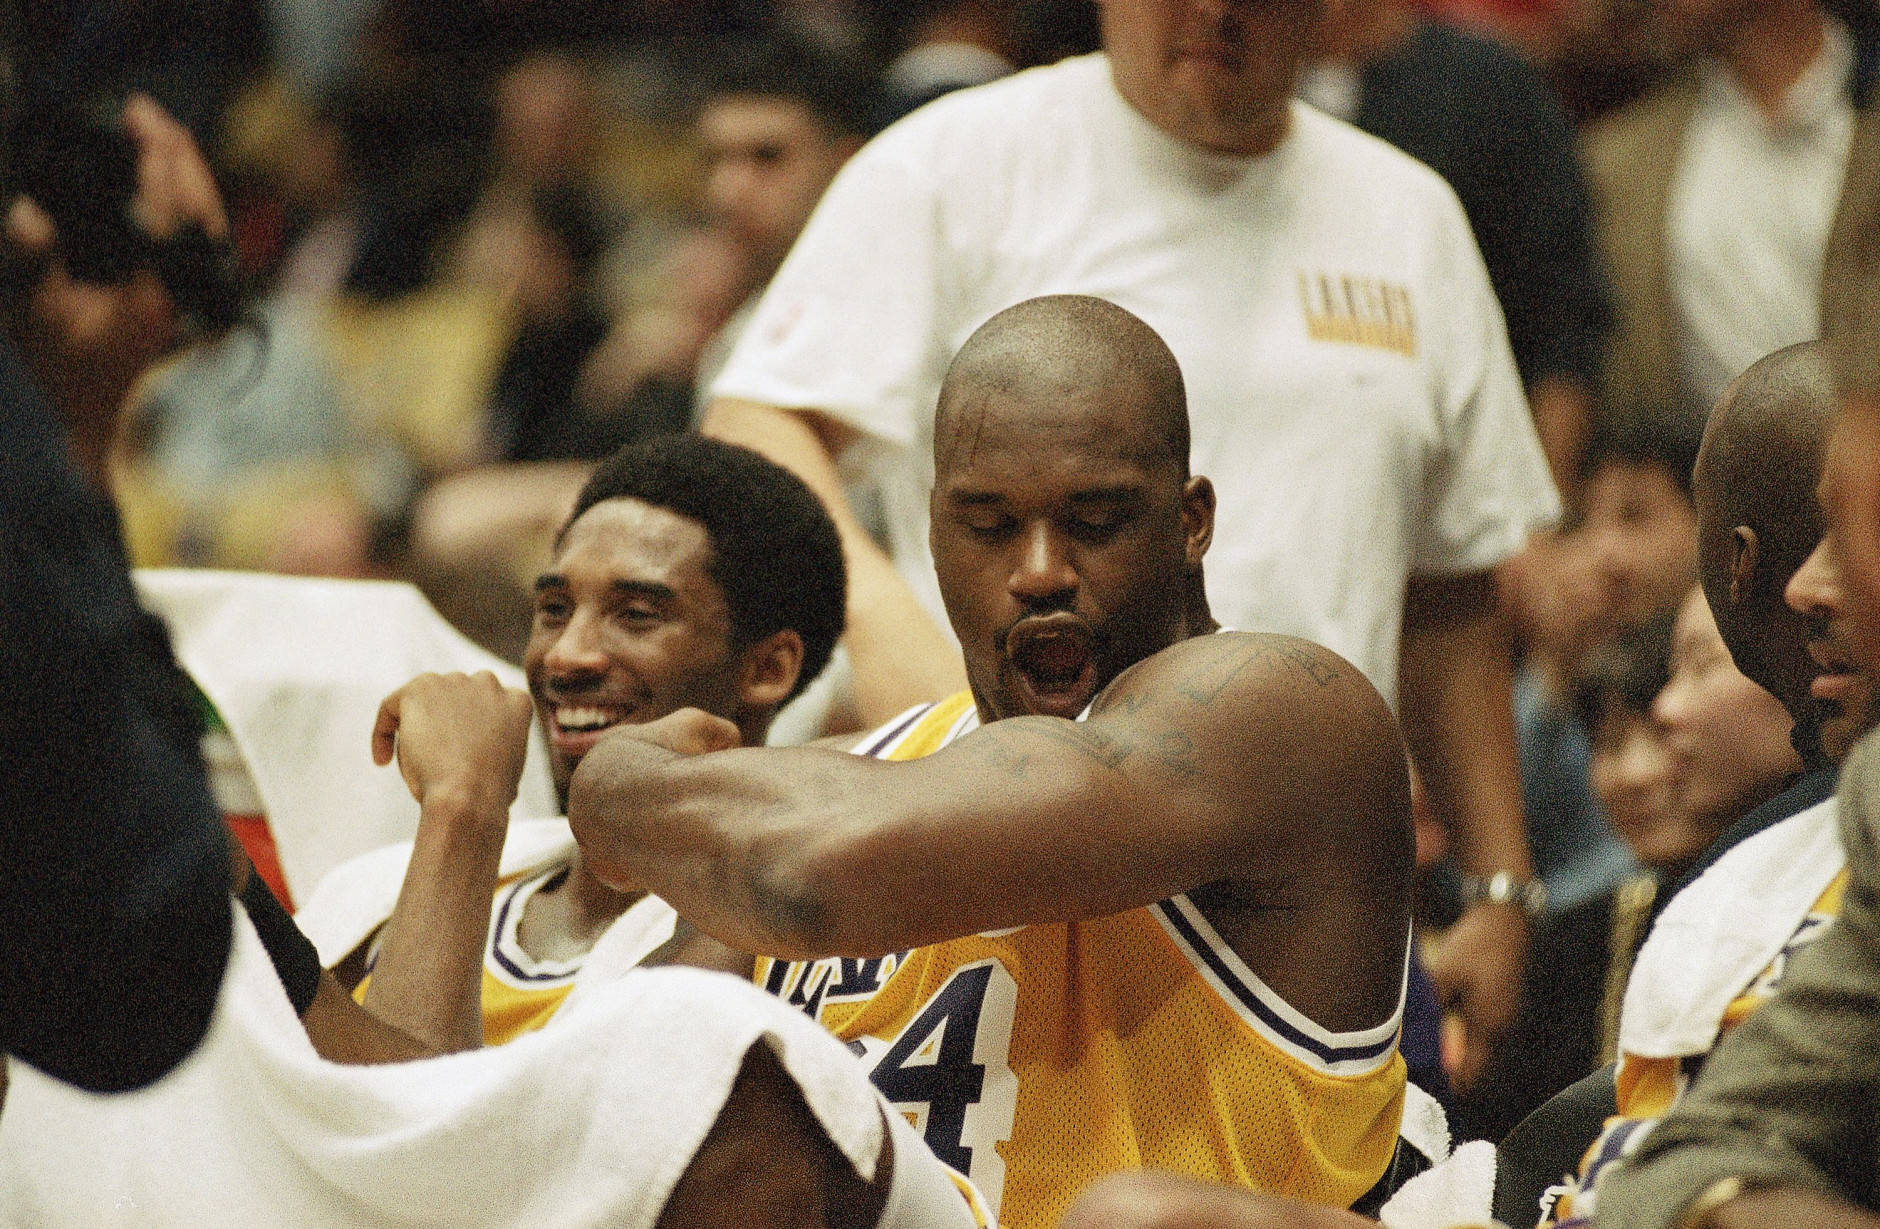 Los Angeles Lakers Shaquille O?Neal, right, flex his arm as he polishes off his superman tattoo seated next to teammate Kobe Bryant during the fourth quarter of their blowout game against the Chicago Bulls, Feb. 1, 1998 in Inglewood, California. O?Neal scored 24-points and Bryant scored 20-points to route the Bulls, 112-87. (AP Photo/Kevork Djansezian)